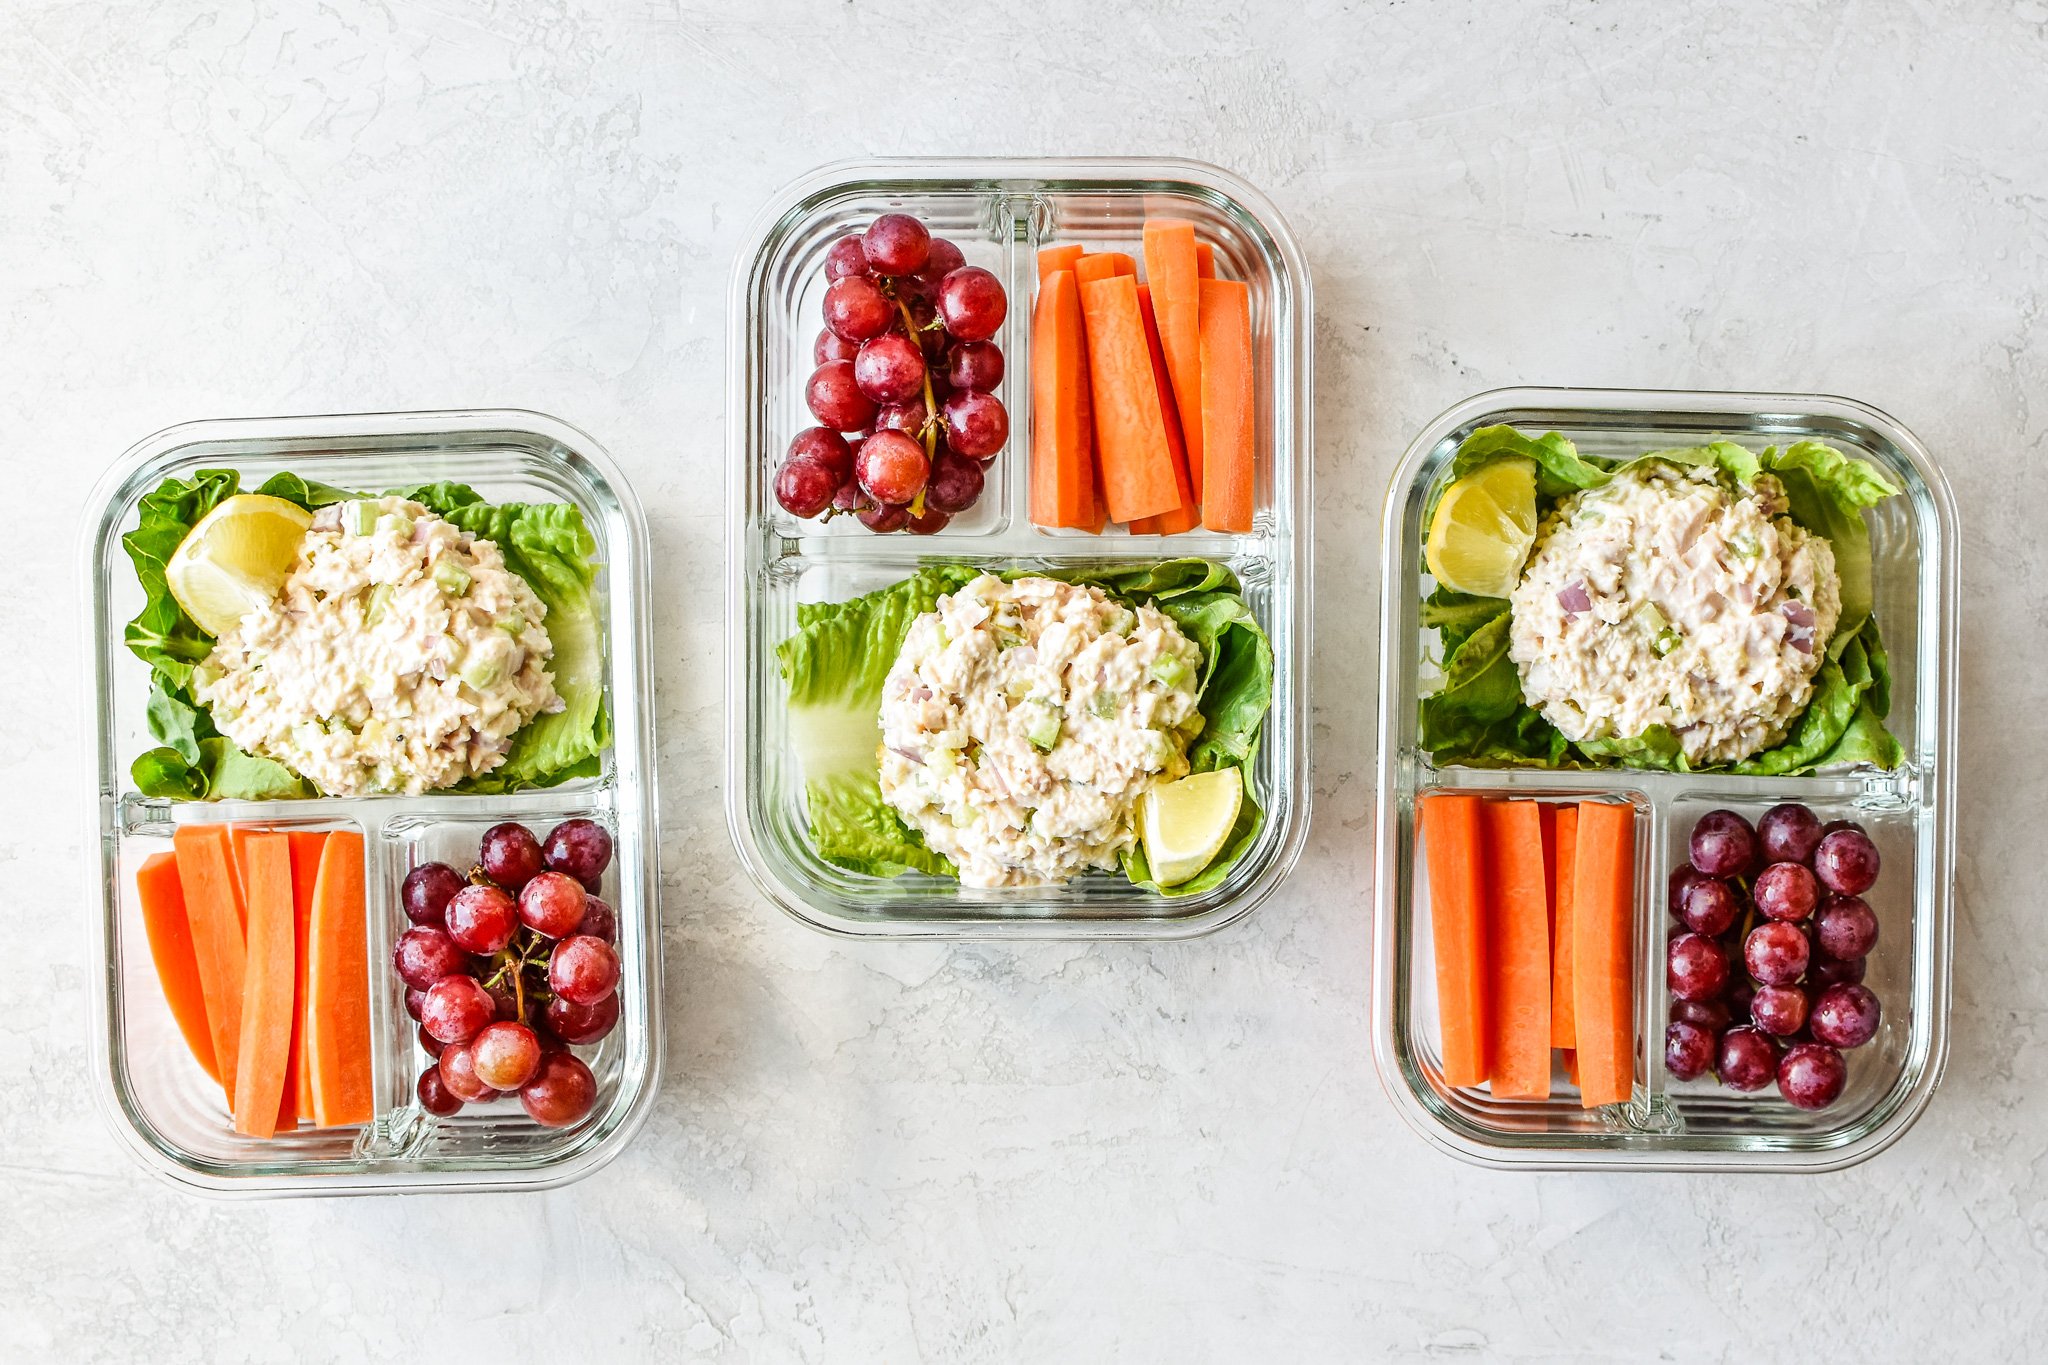 Three tuna salad lettuce wraps meal prep lunches on the counter viewed from above.